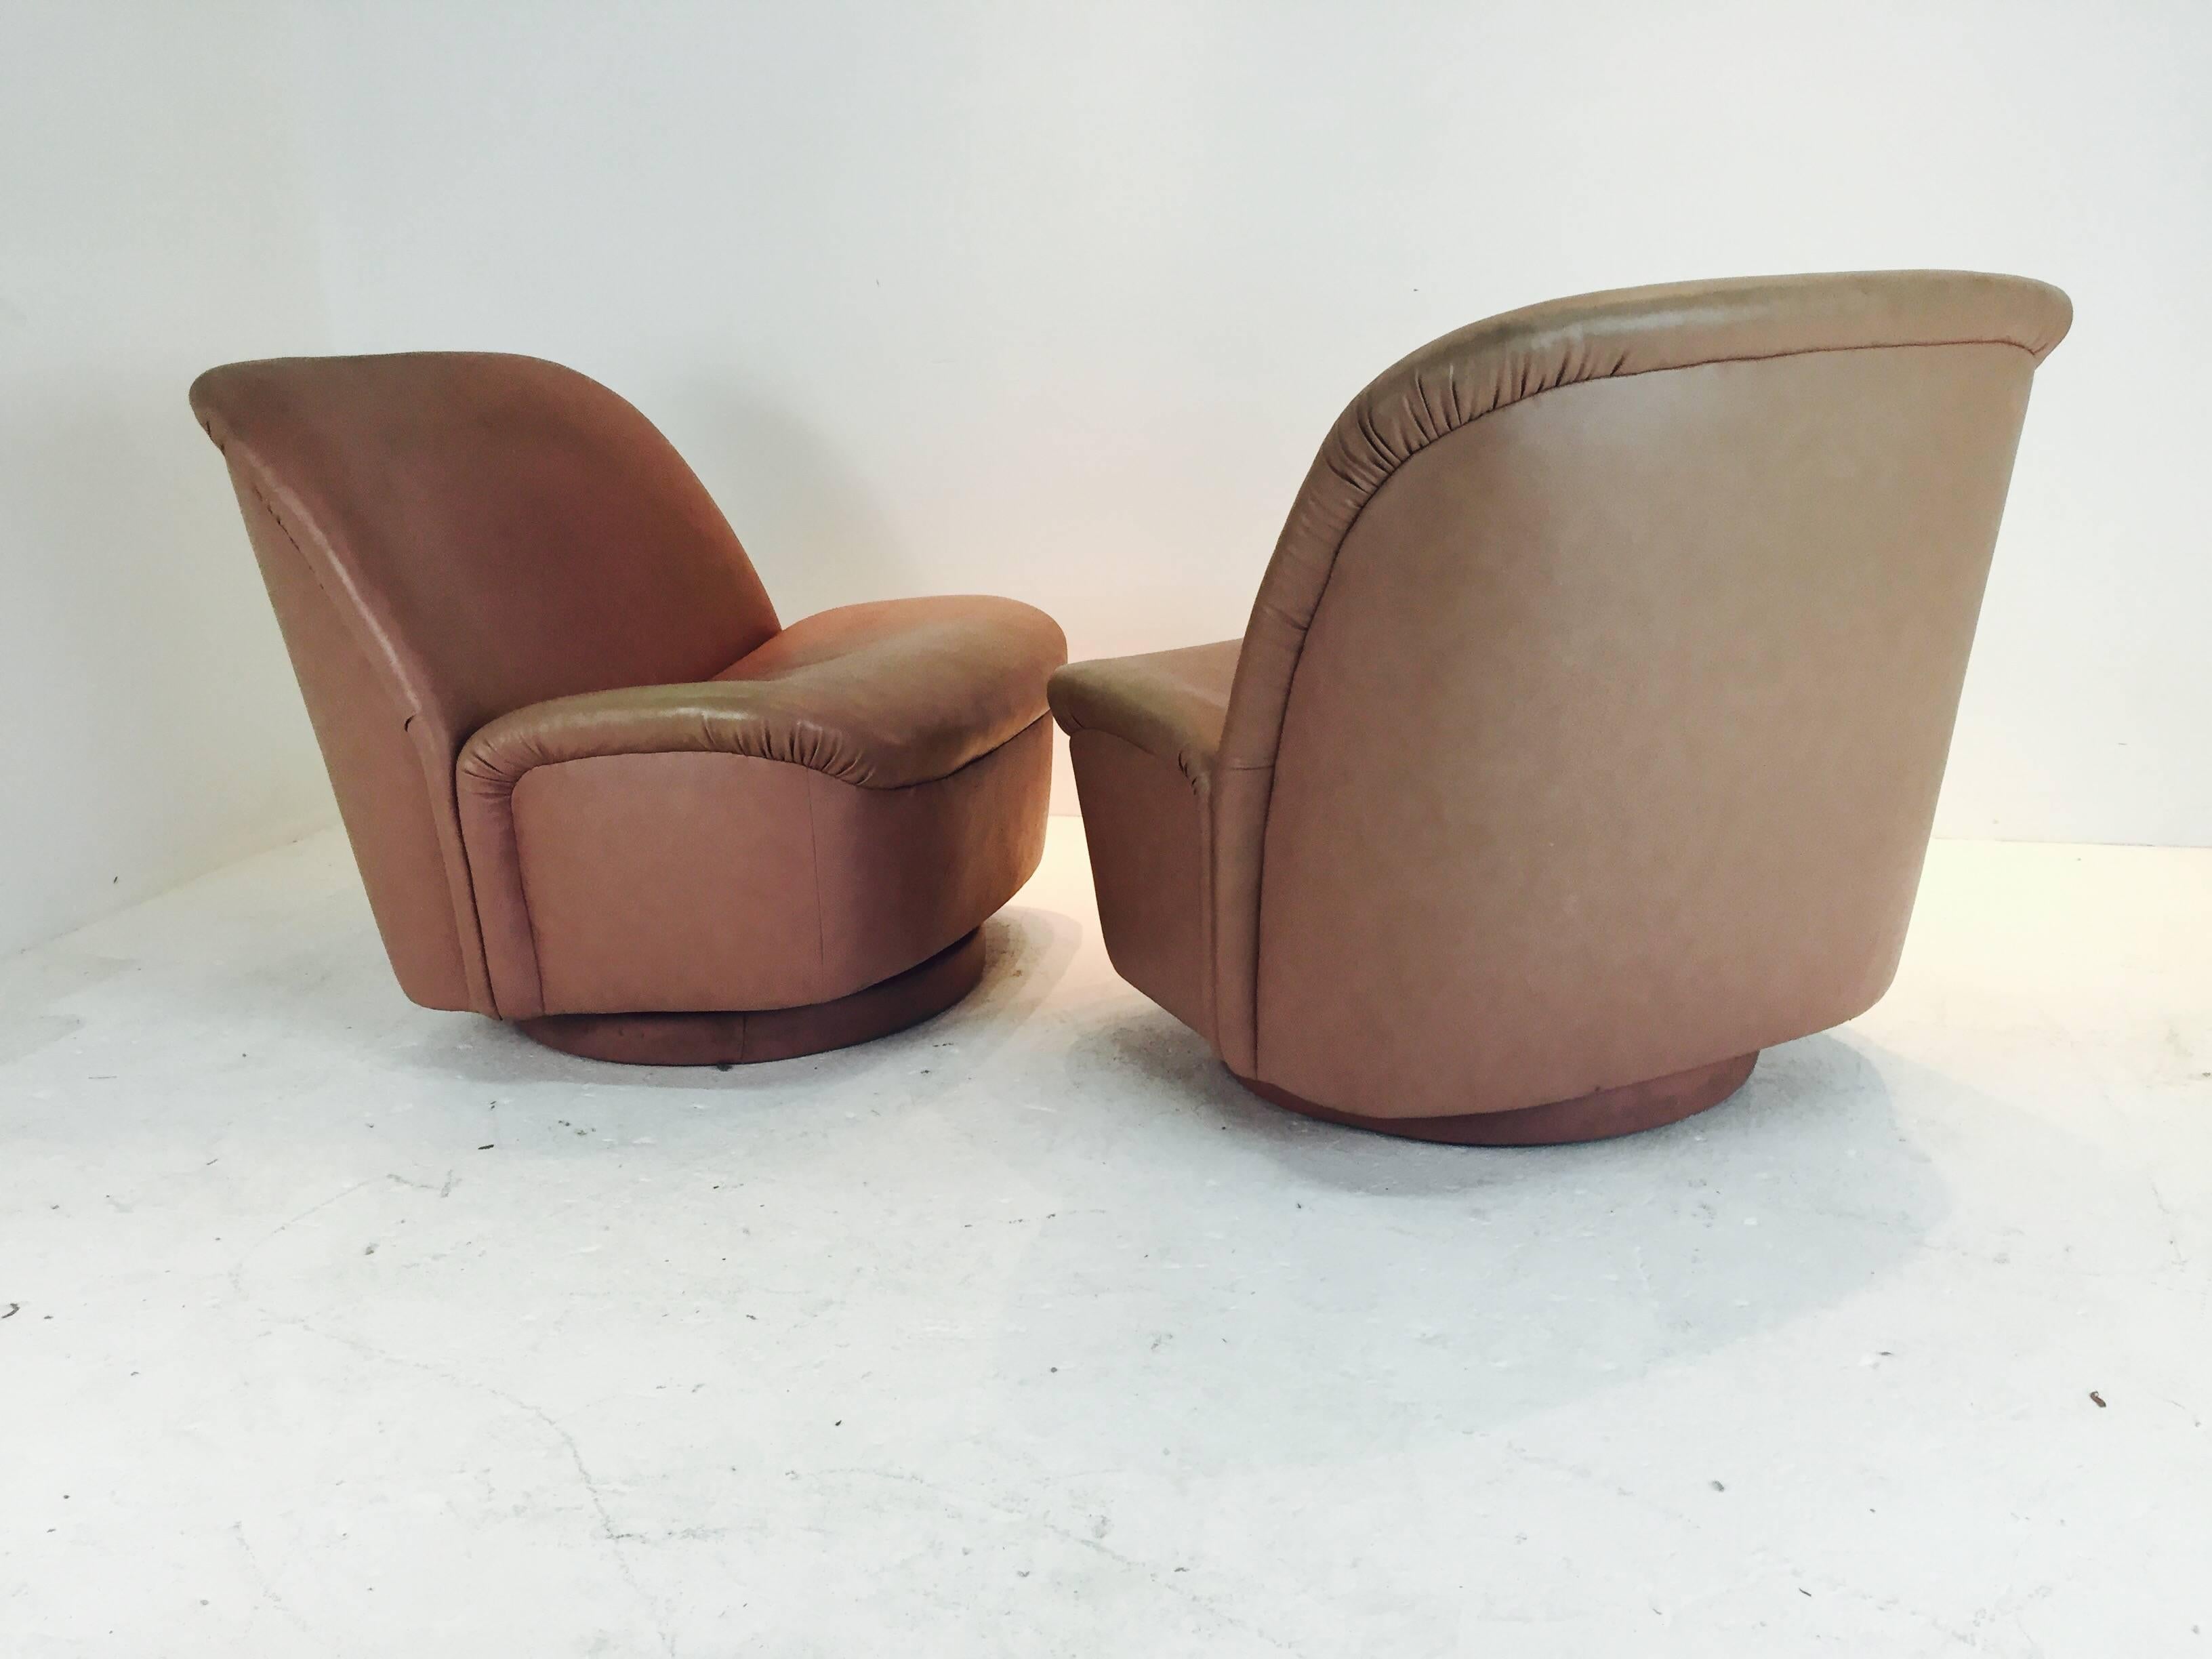 Pair of Blush Leather Swivel and Tilt Chairs by Directional 1